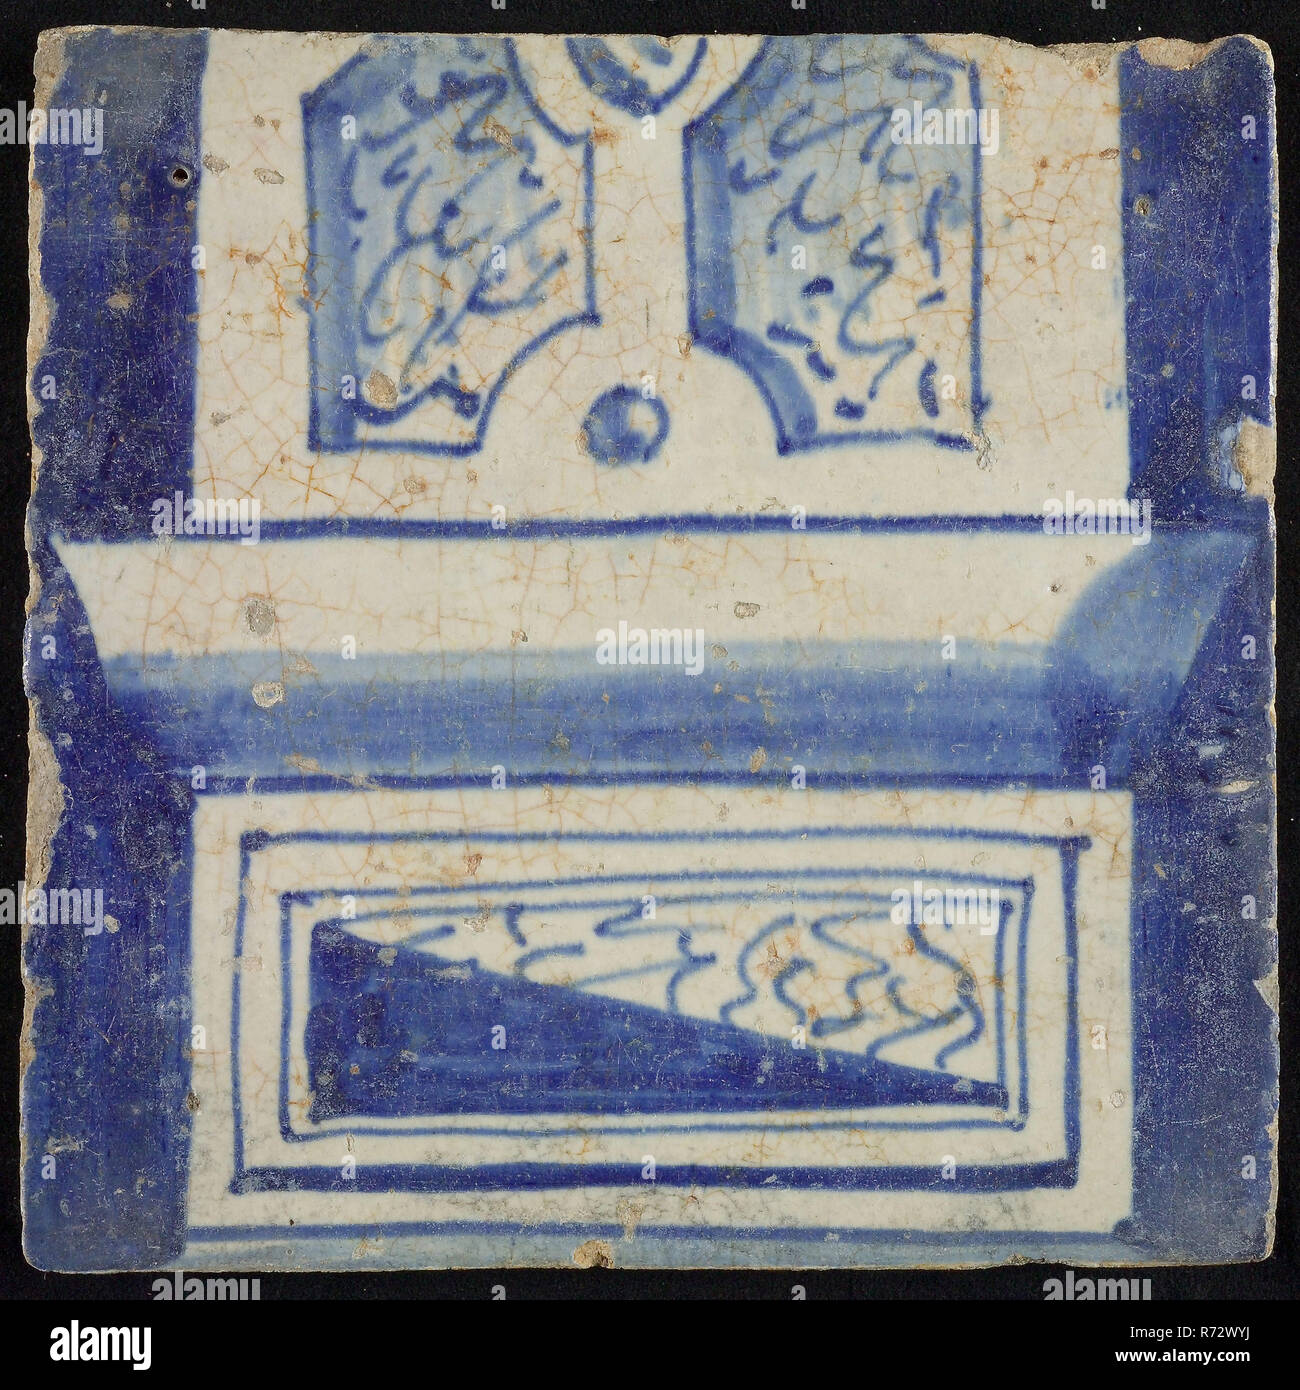 Tile of chimney pilaster, blue on white, bottom of column with basement, compartment with irregular lines, chimney pilaster tile pilaster footage fragment ceramics pottery glaze, bottom left 1 or slap drawn S (see also 843) 1914 construction town hall Zandstraat-quarters Second World War war bombardment Rotterdam Stadscentrum Stadsdriehoek 1940 renaissance Coming from debris after bombing on Rotterdam in May 1940. Stock Photo